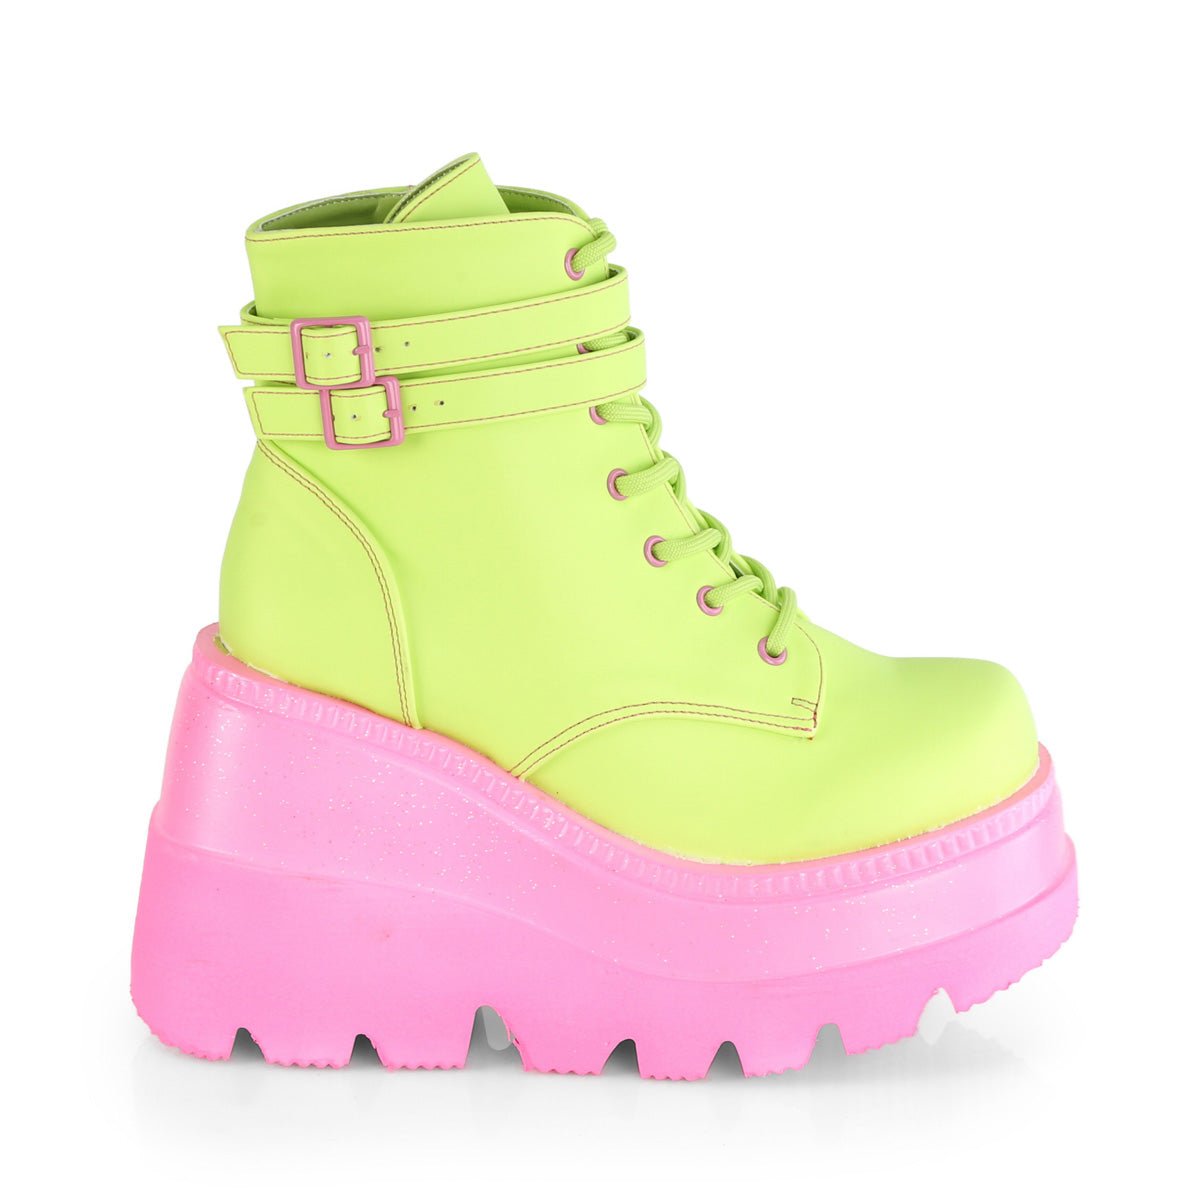 Too Fast | Demonia Shaker 52 | Lime Green Reflective Vegan Leather Women's Ankle Boots